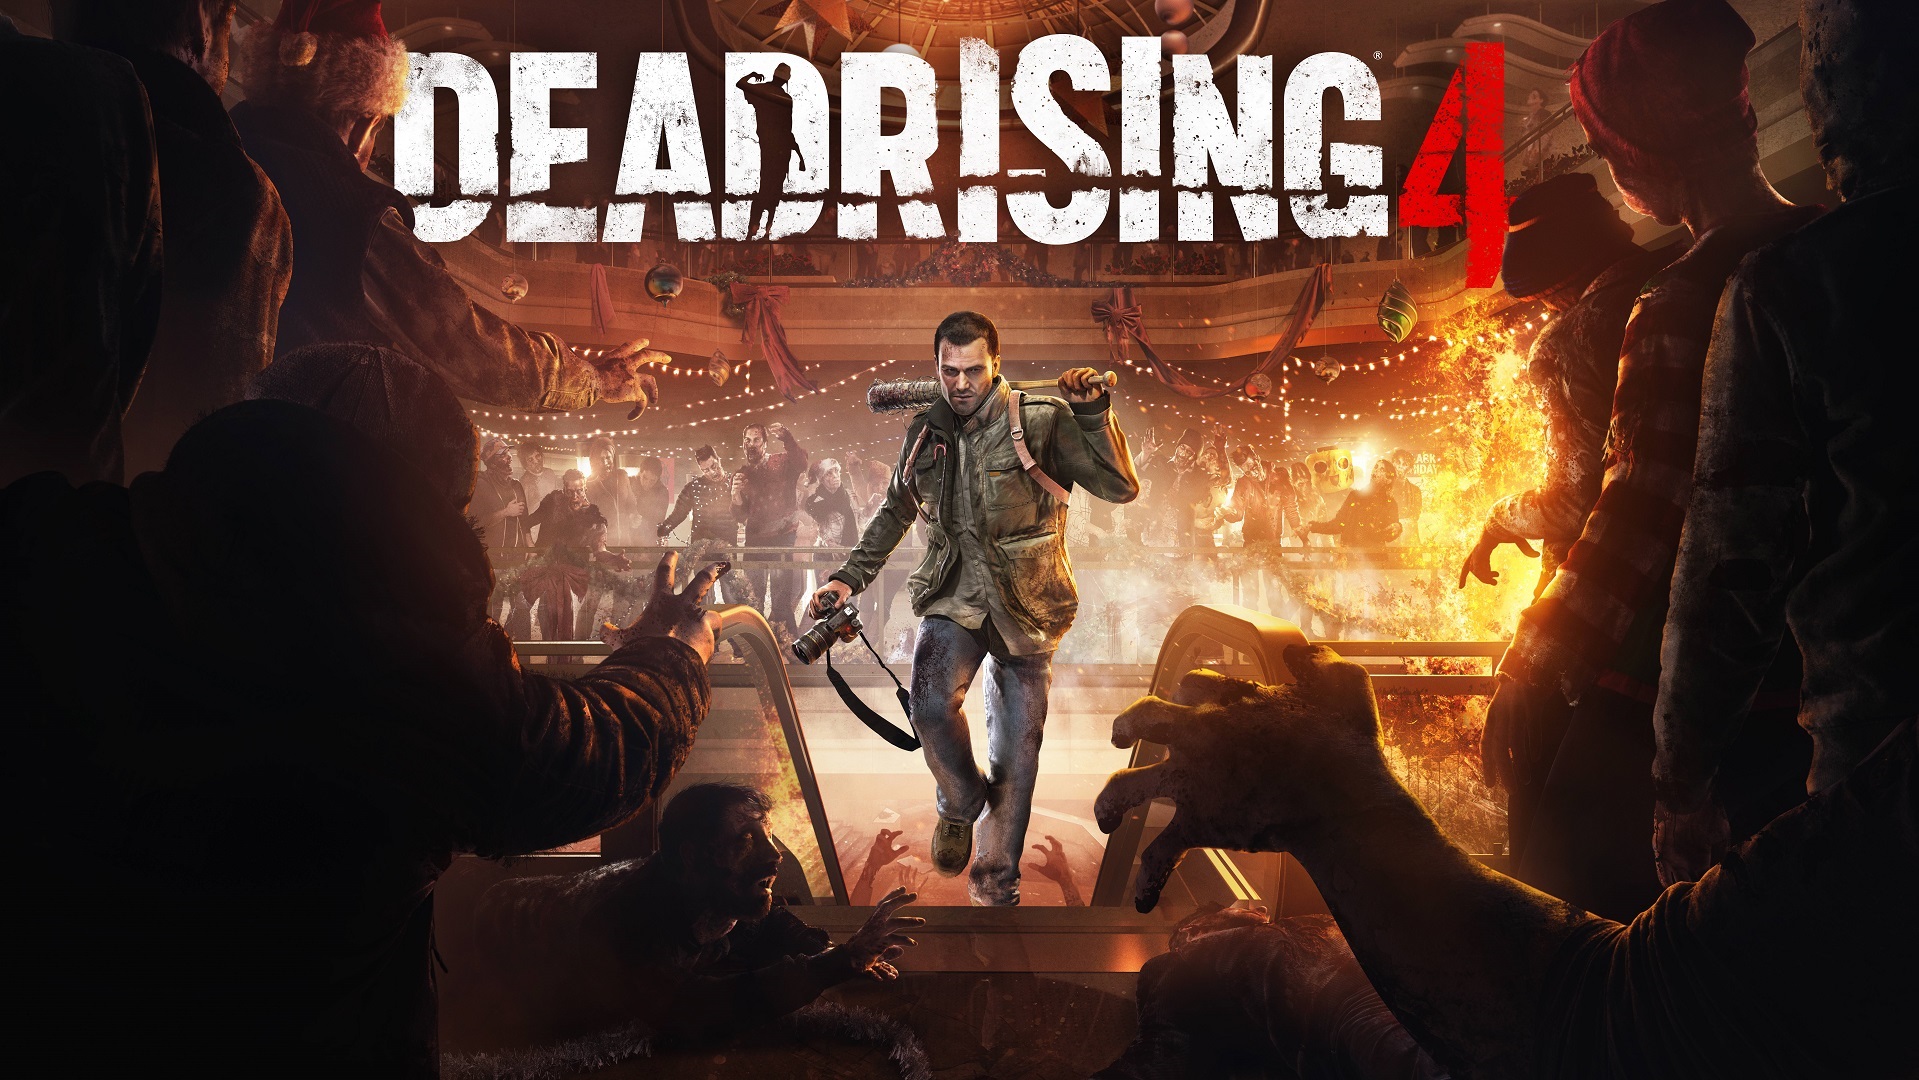 Dead Rising 4 Confirmed for Xbox One, PC – Timed Exclusive for One Year